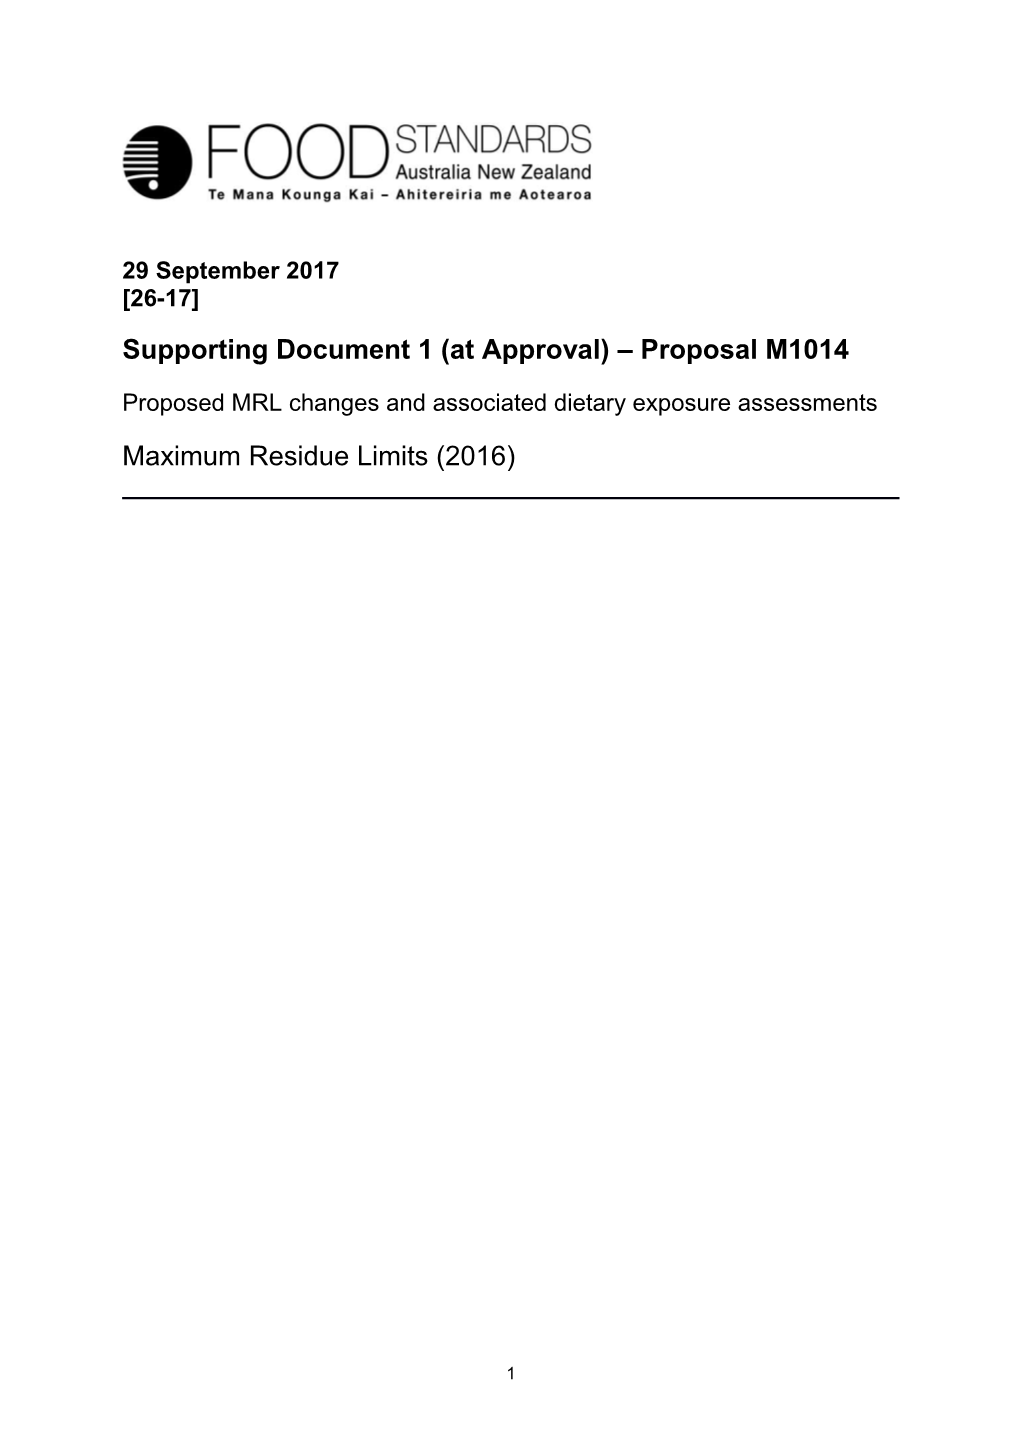 Supporting Document 1(At Approval) Proposal M1014